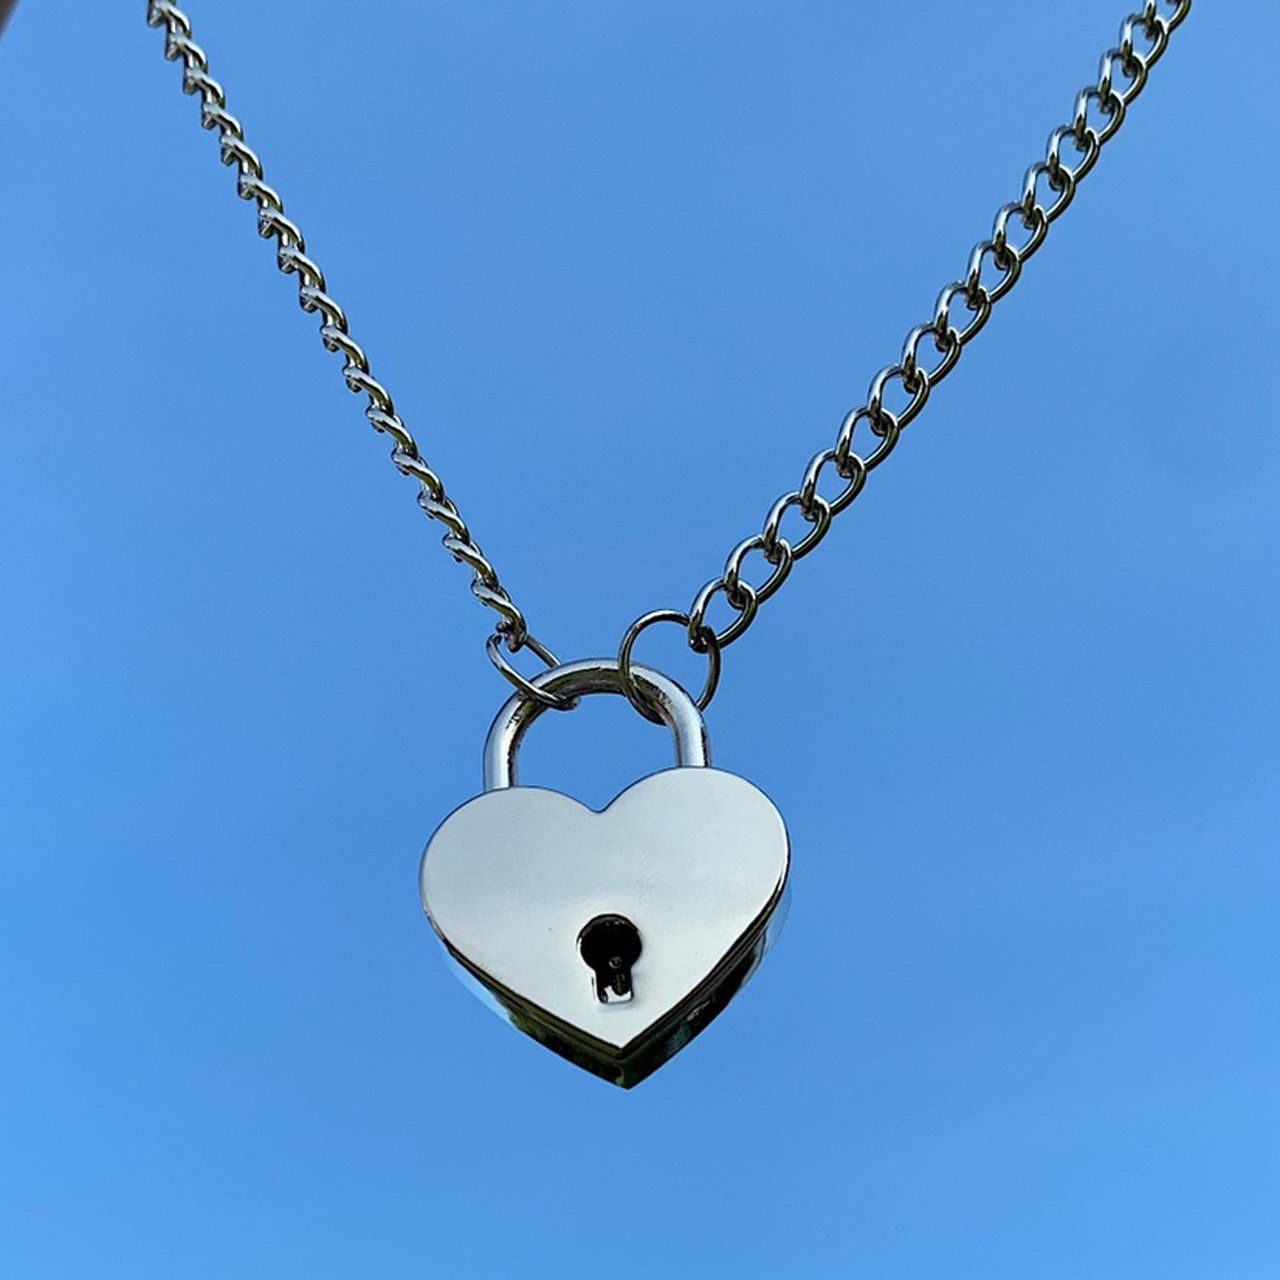 Heart Shaped Padlock Chain Necklace. Keys Will Come – Depop Pertaining To Recent Heart Shaped Padlock Rings (Gallery 7 of 25)